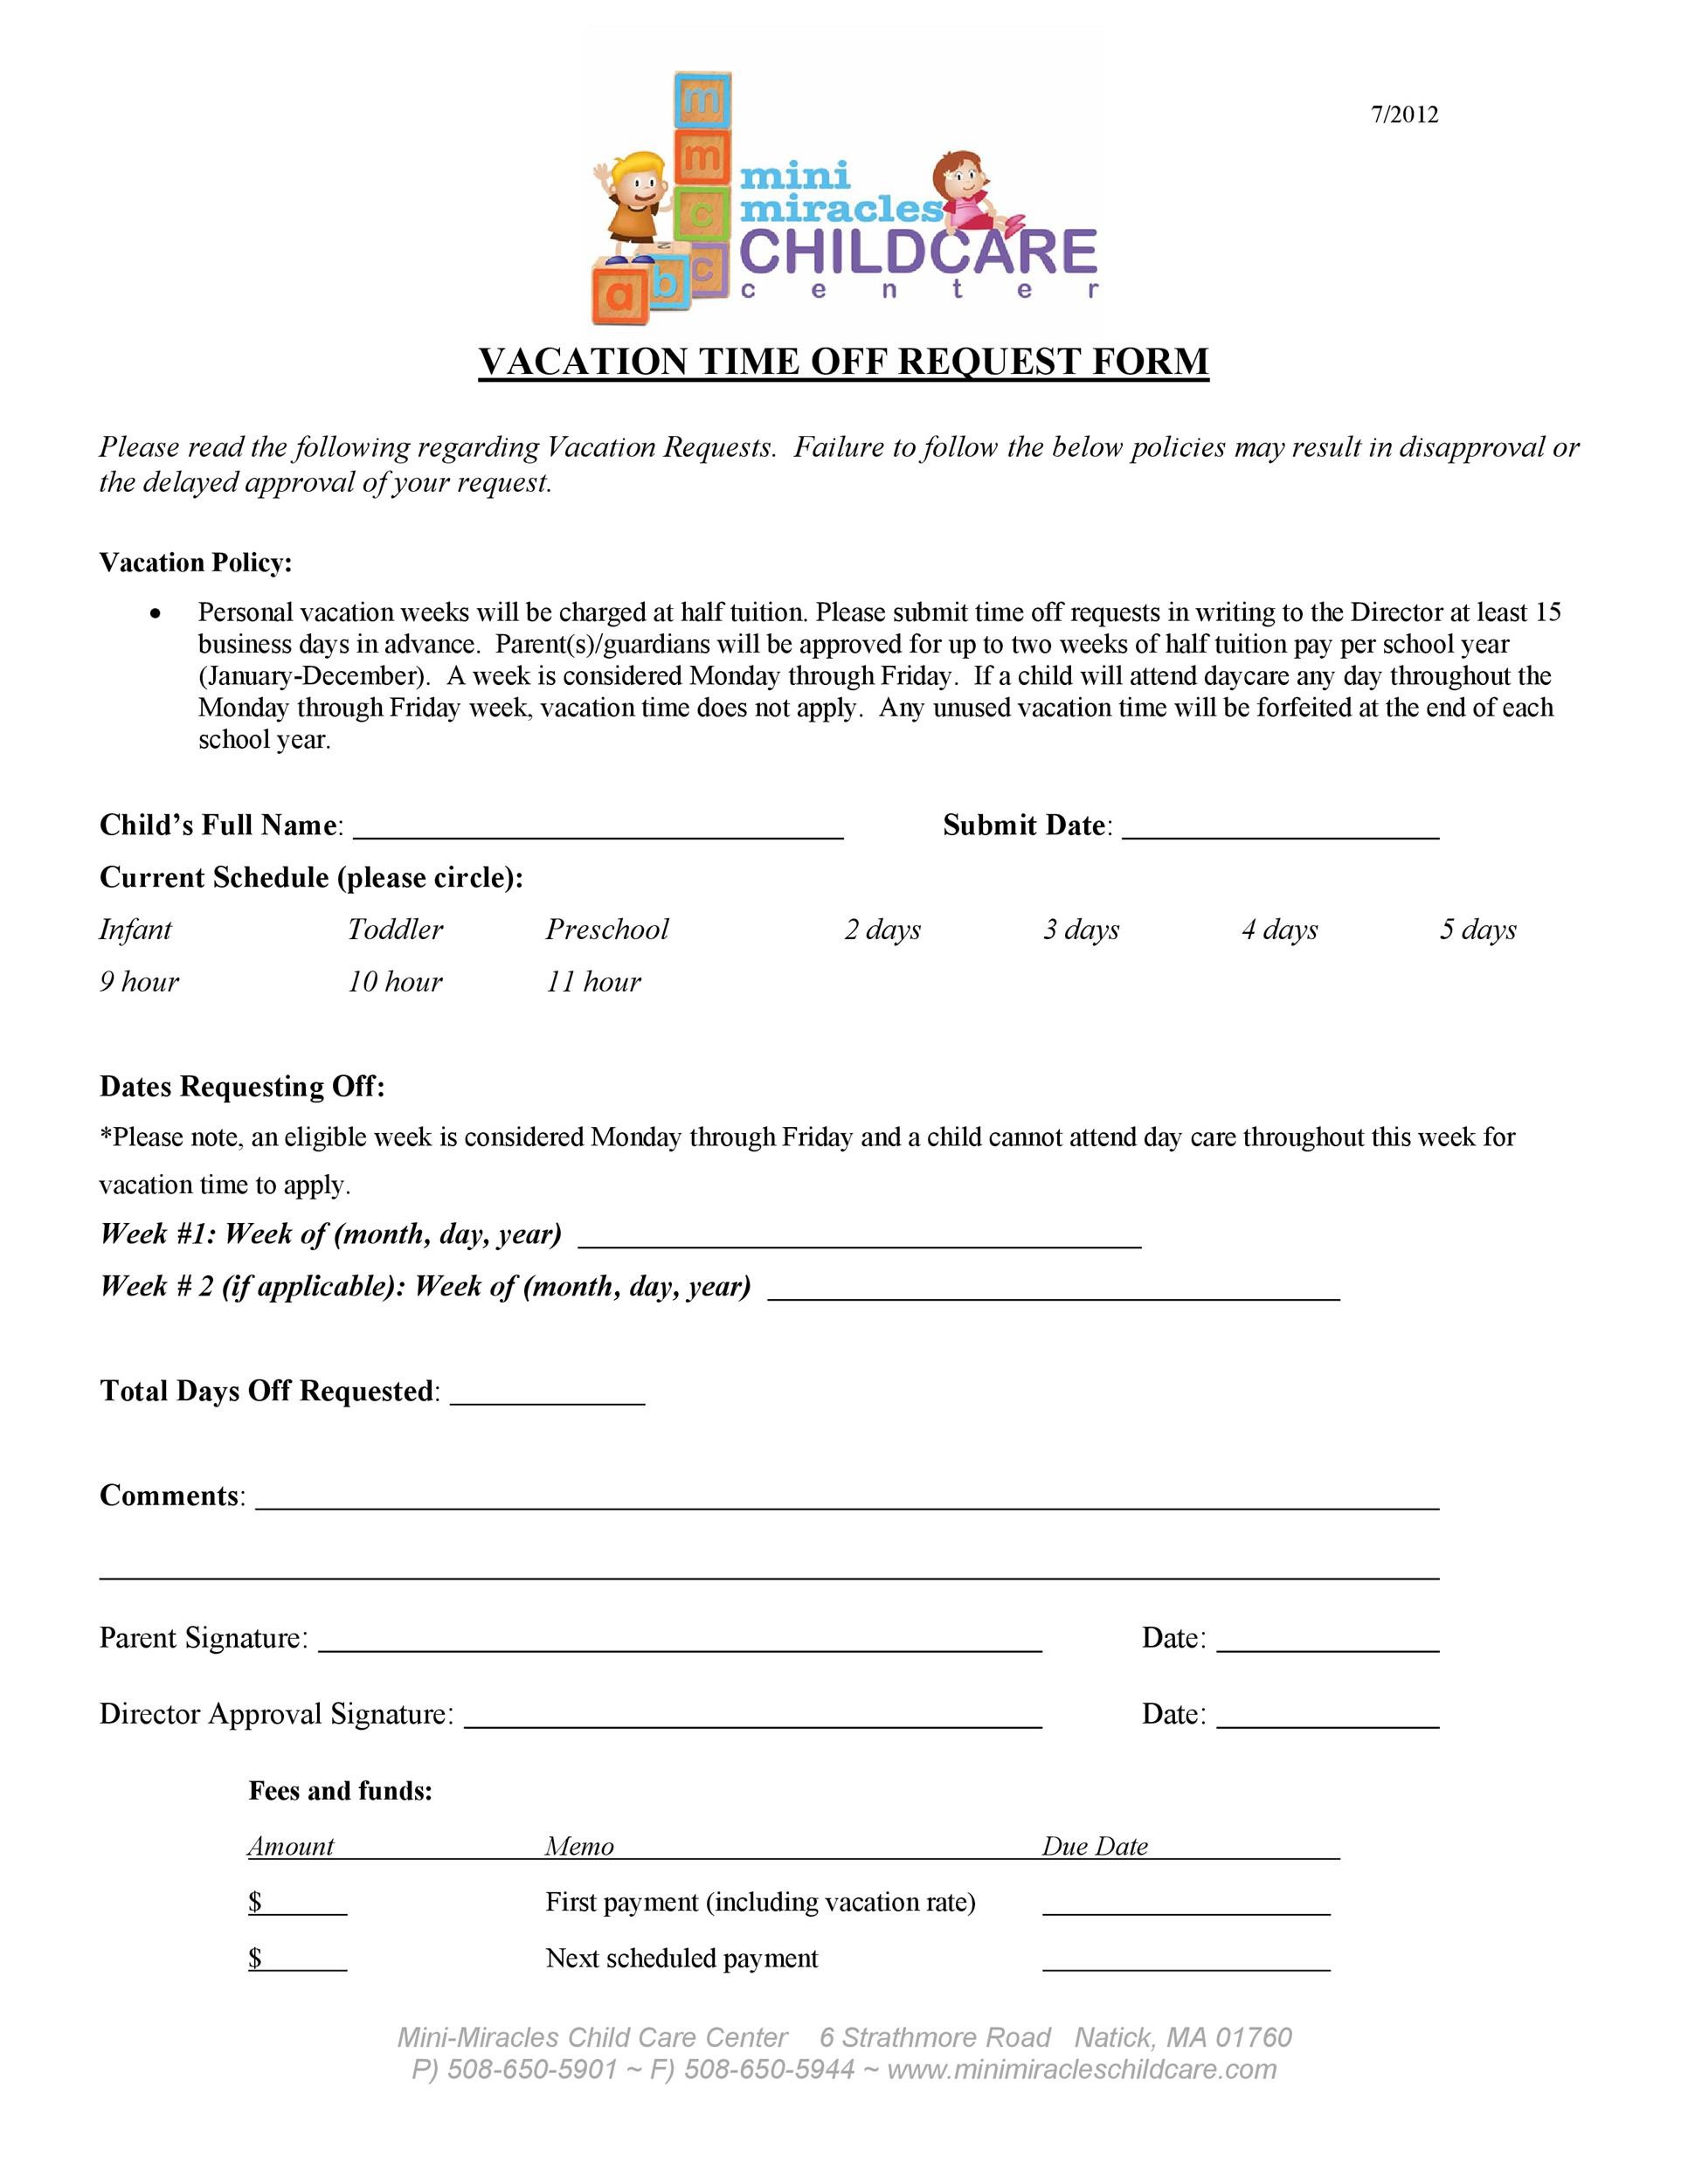 Free vacation request form 35